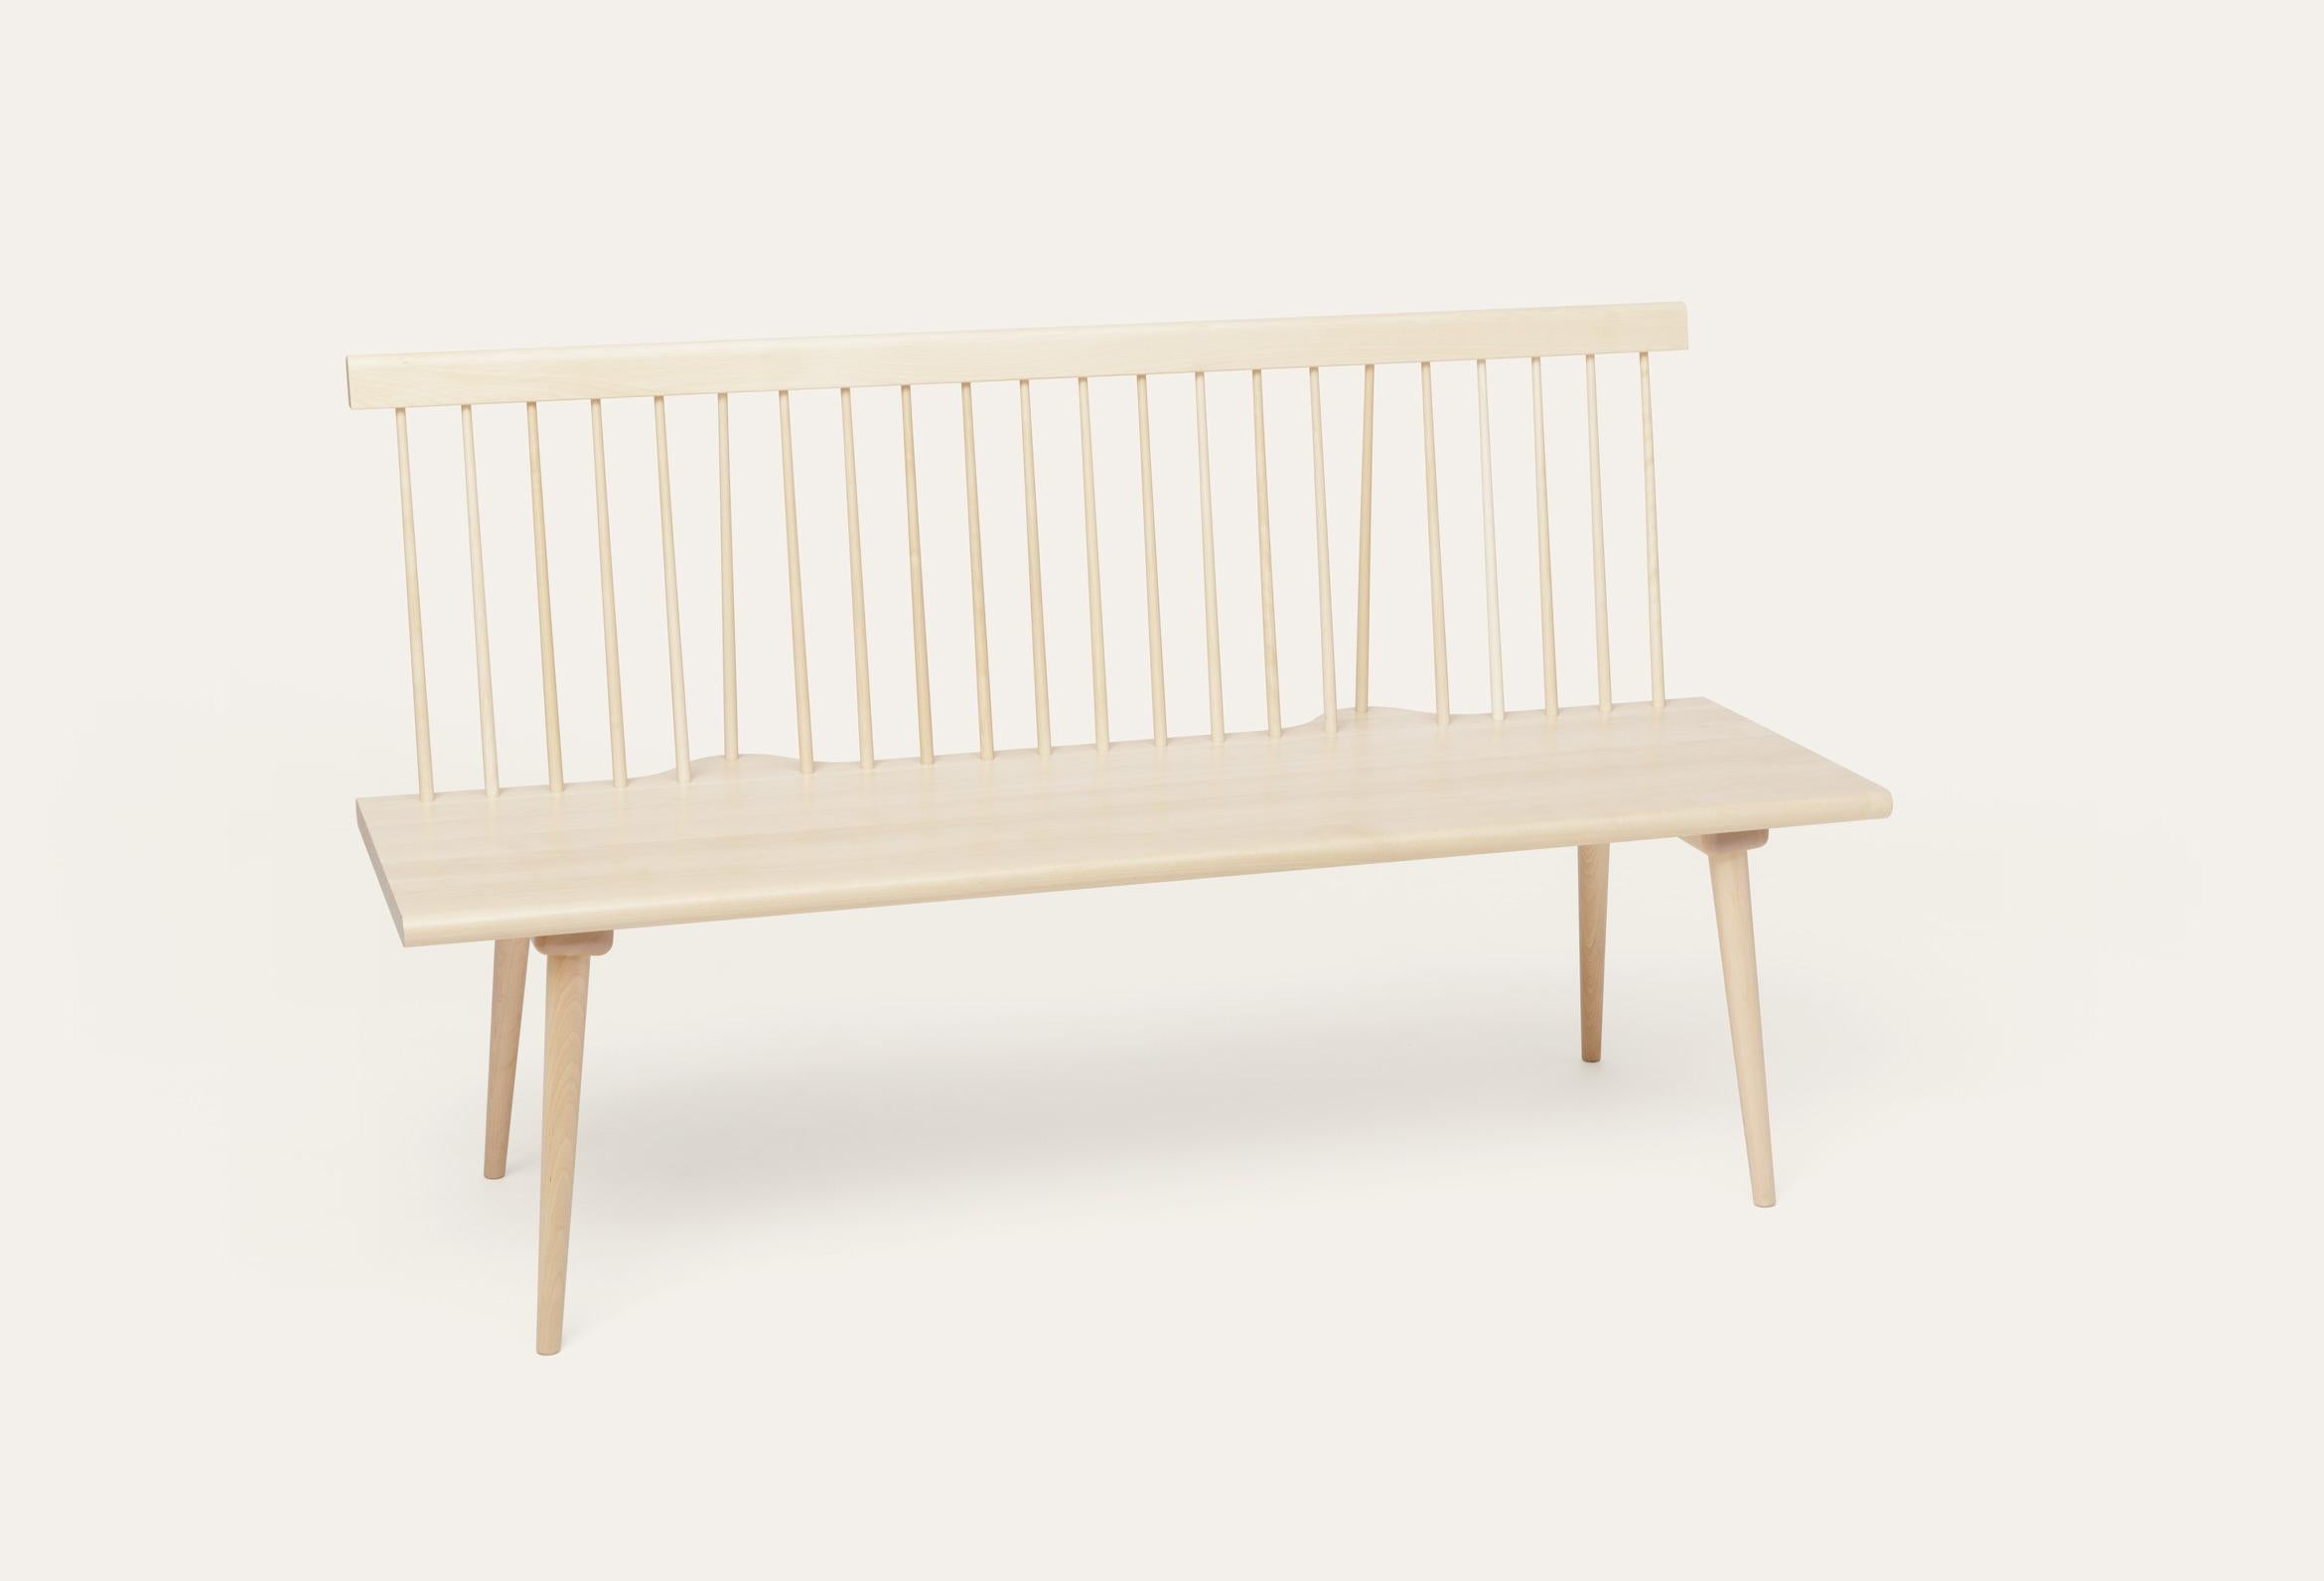 Natural Along birch sofa by Storängen Design
Dimensions: D 52 x W 150 x H 87 x SH 45 cm
Materials: birch wood.
Also available in other colors and with seat cushion.

Along can be as long as you want to be. Each module is manufactured separately